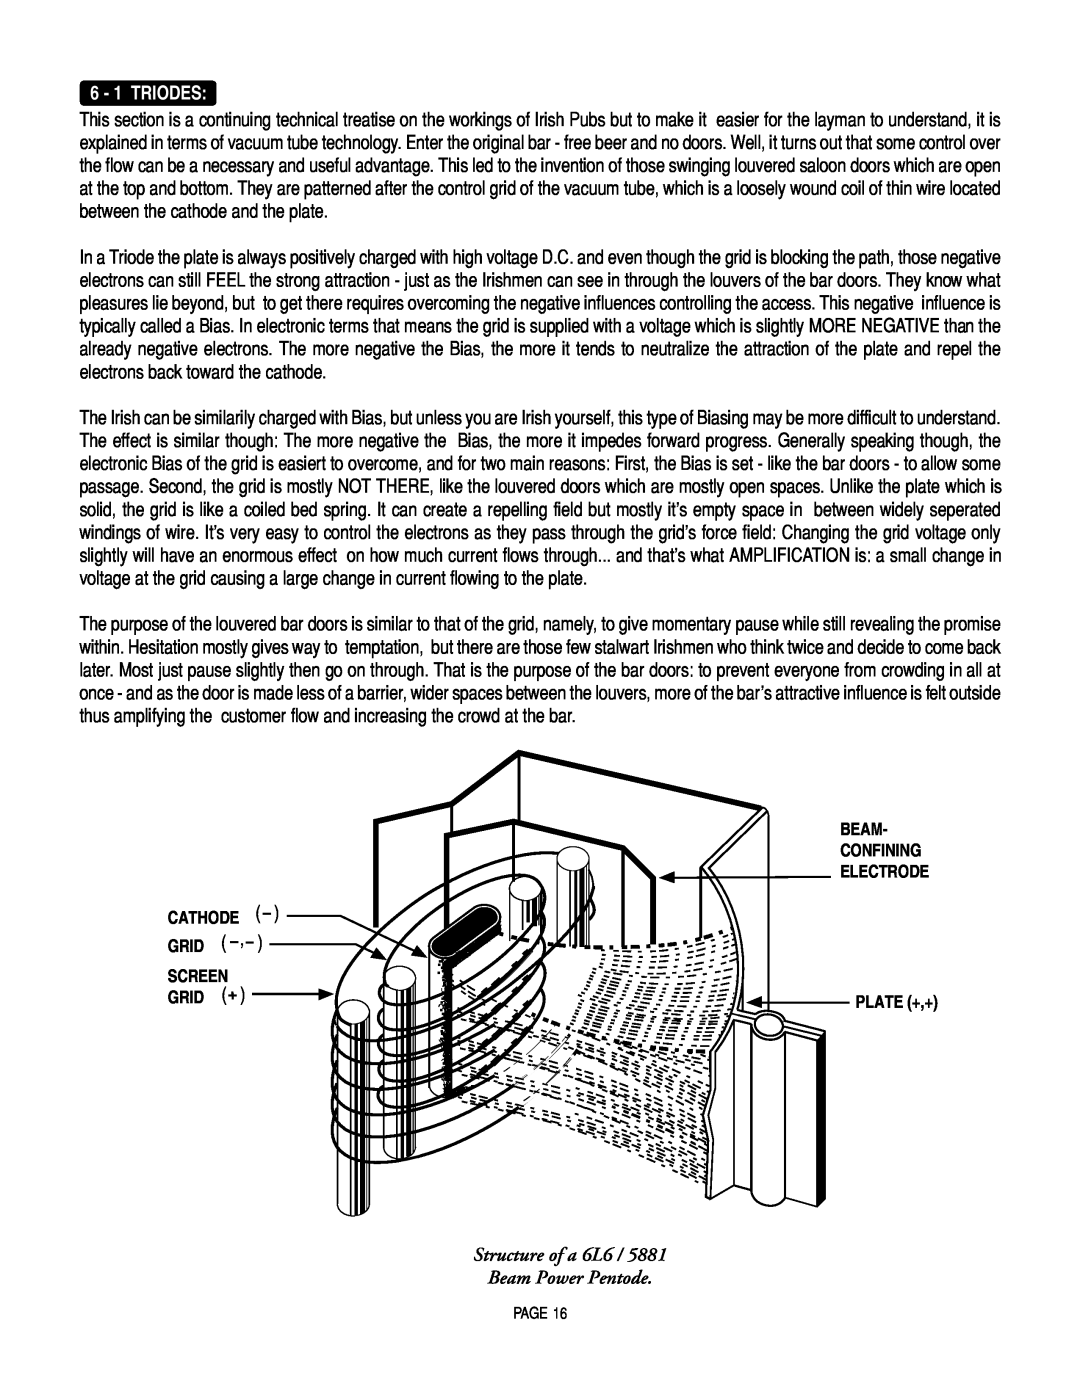 Mesa/Boogie Vacuum Tube Audio owner manual 6 - 1 TRIODES, Structure of a 6L6 / Beam Power Pentode 